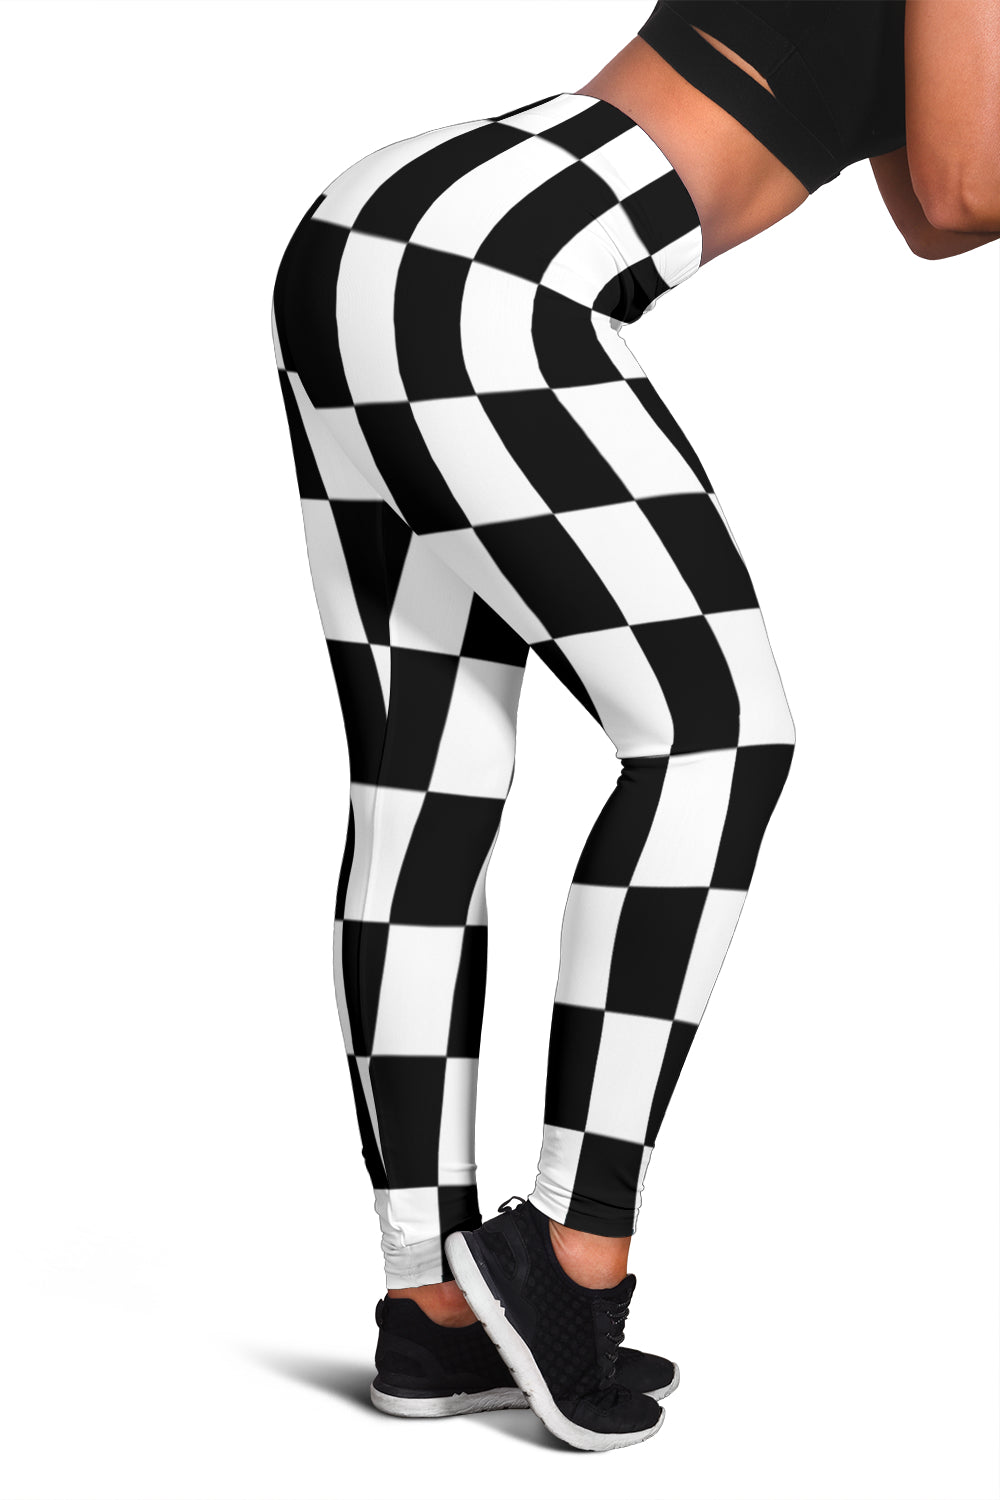 Shes Badas Black White Checkered Leggings Women's Vans Classic Skater Style  / Racing Pattern Stretchy Pants / Cute Soft Fashion Tights -  Sweden